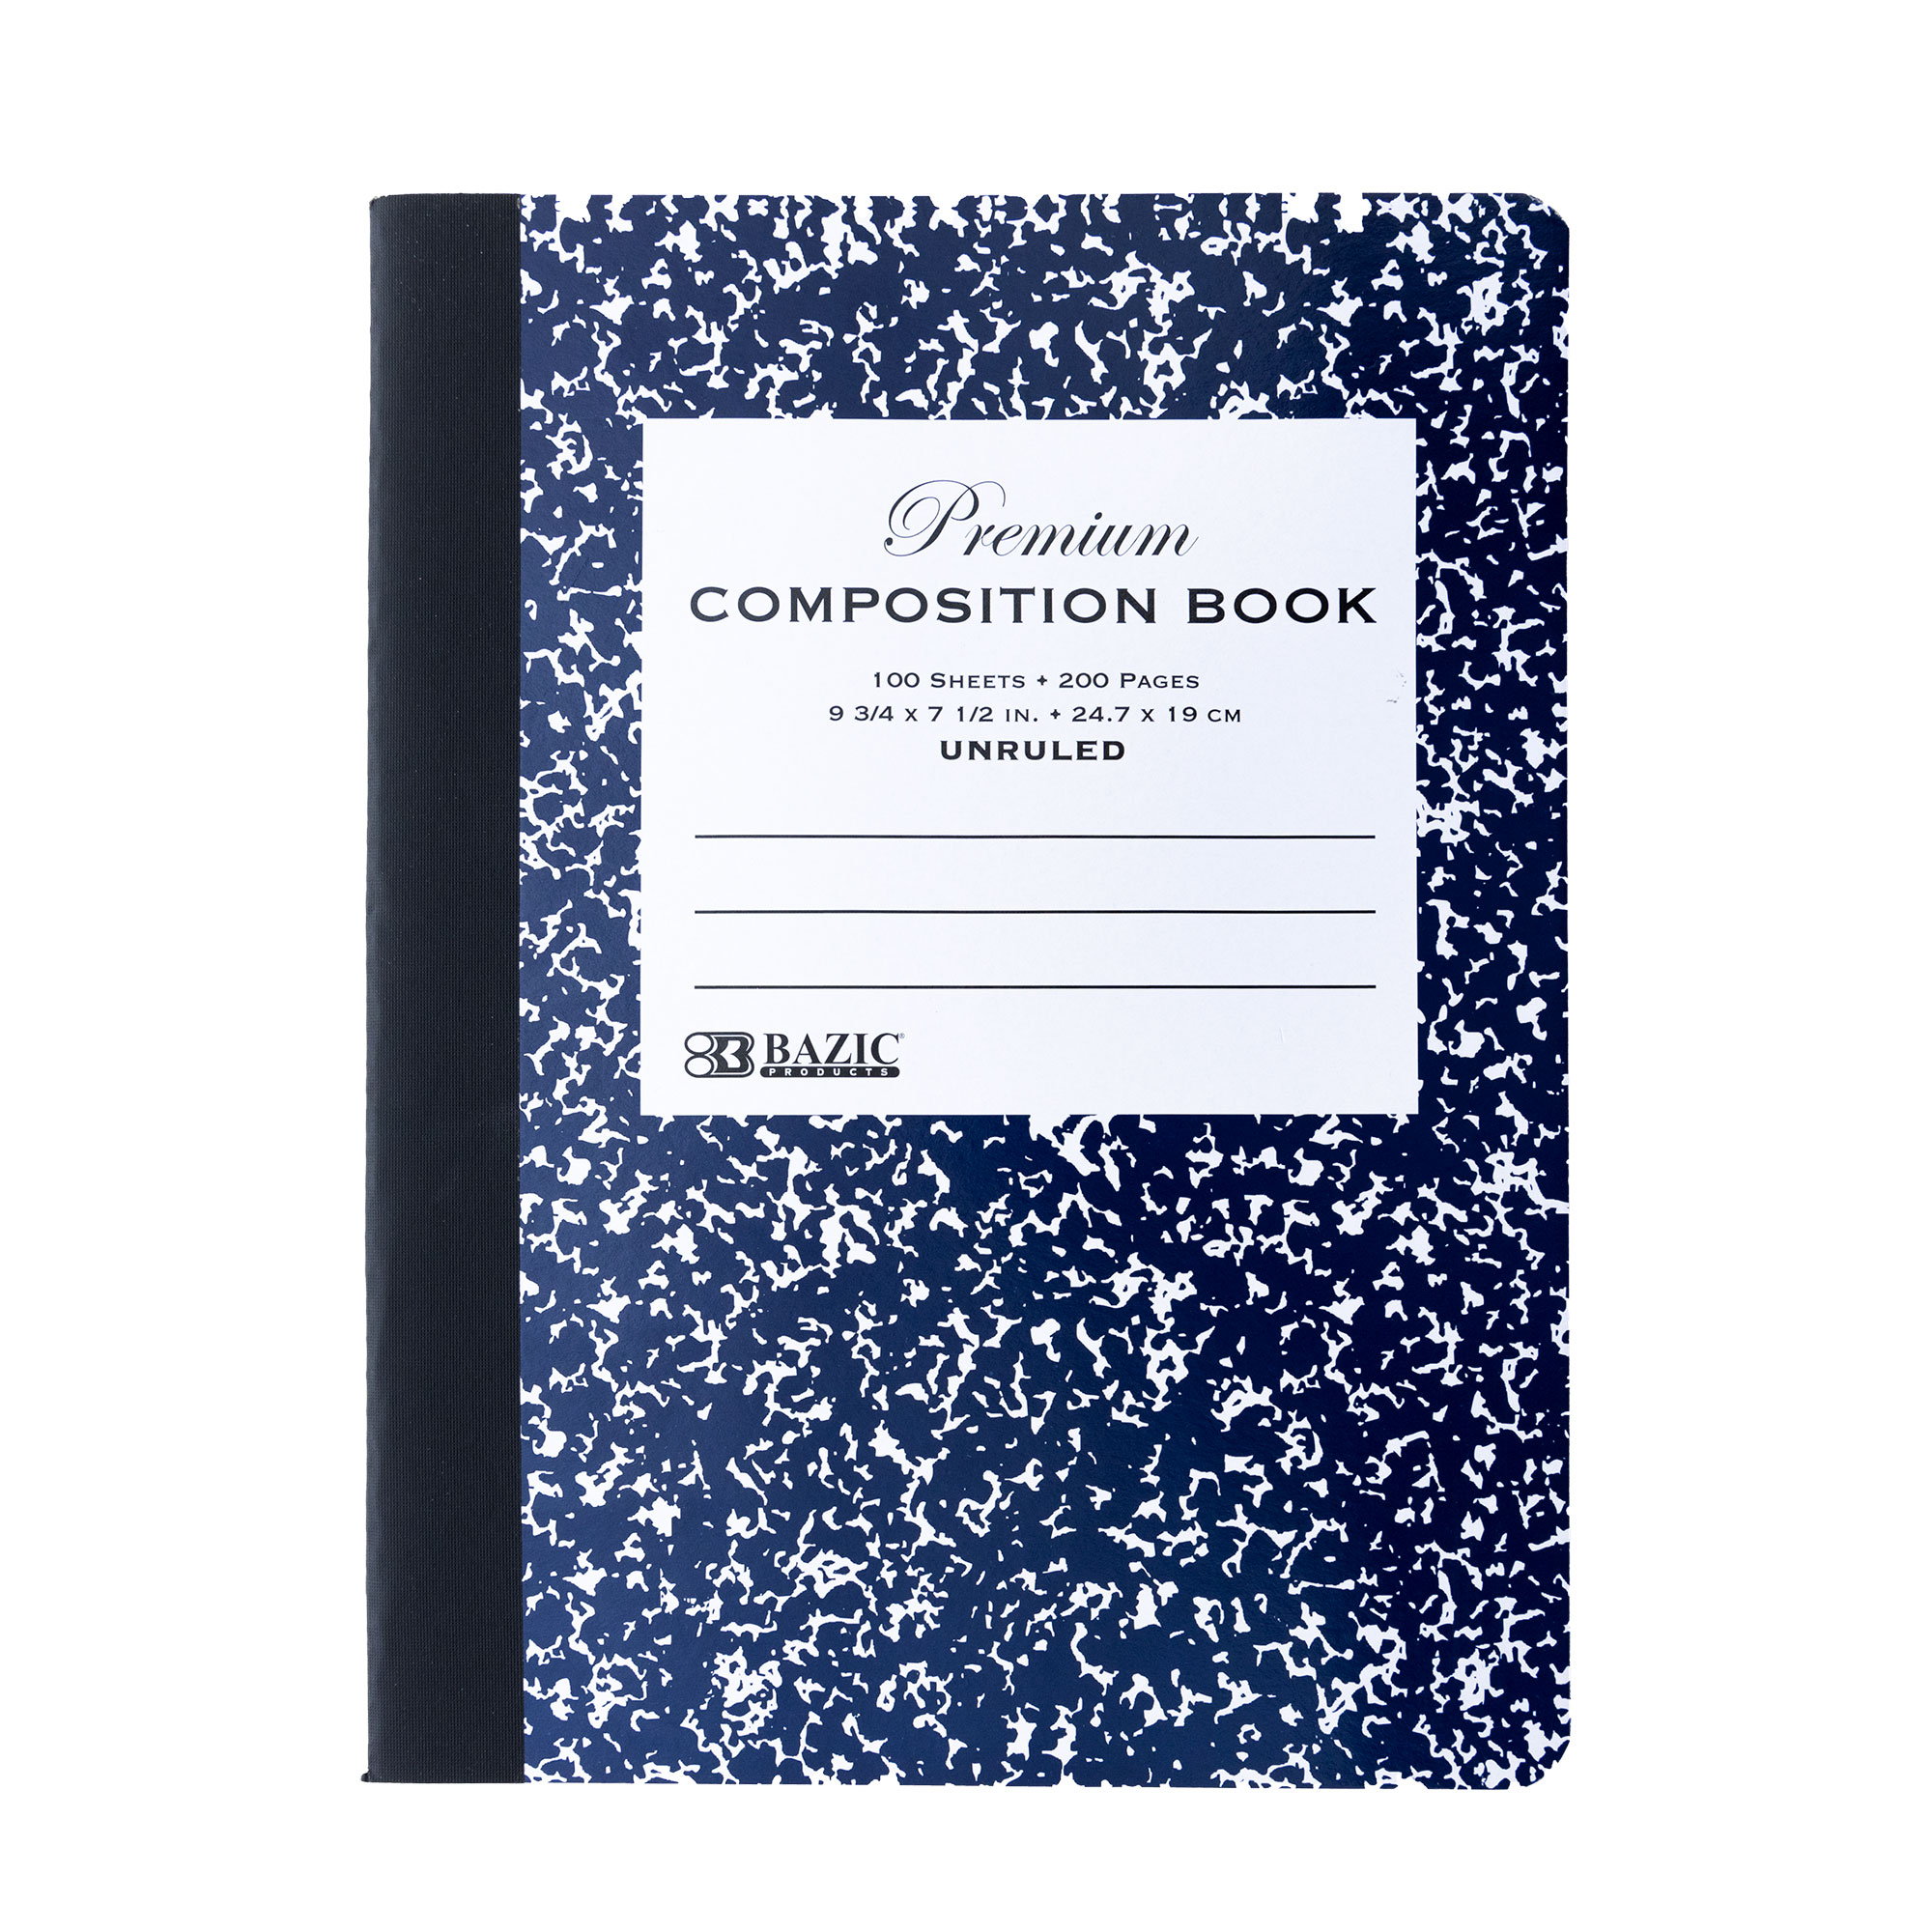  SKETCH BOOK: Blank / Unruled Composition Note Book